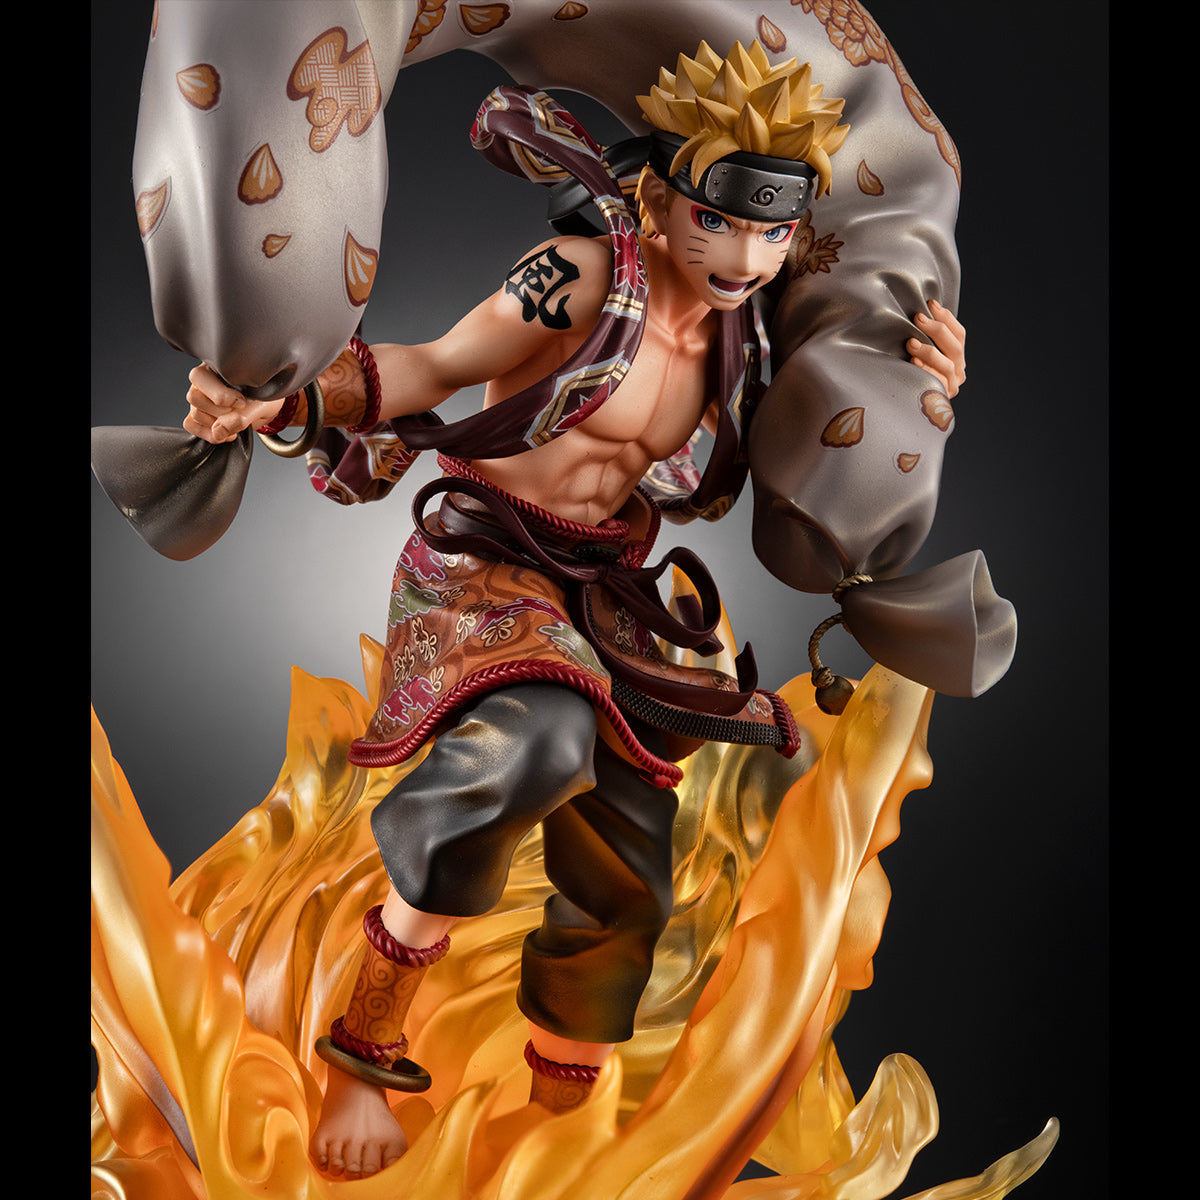 Naruto "Wind God" GEM Statue by Megahouse